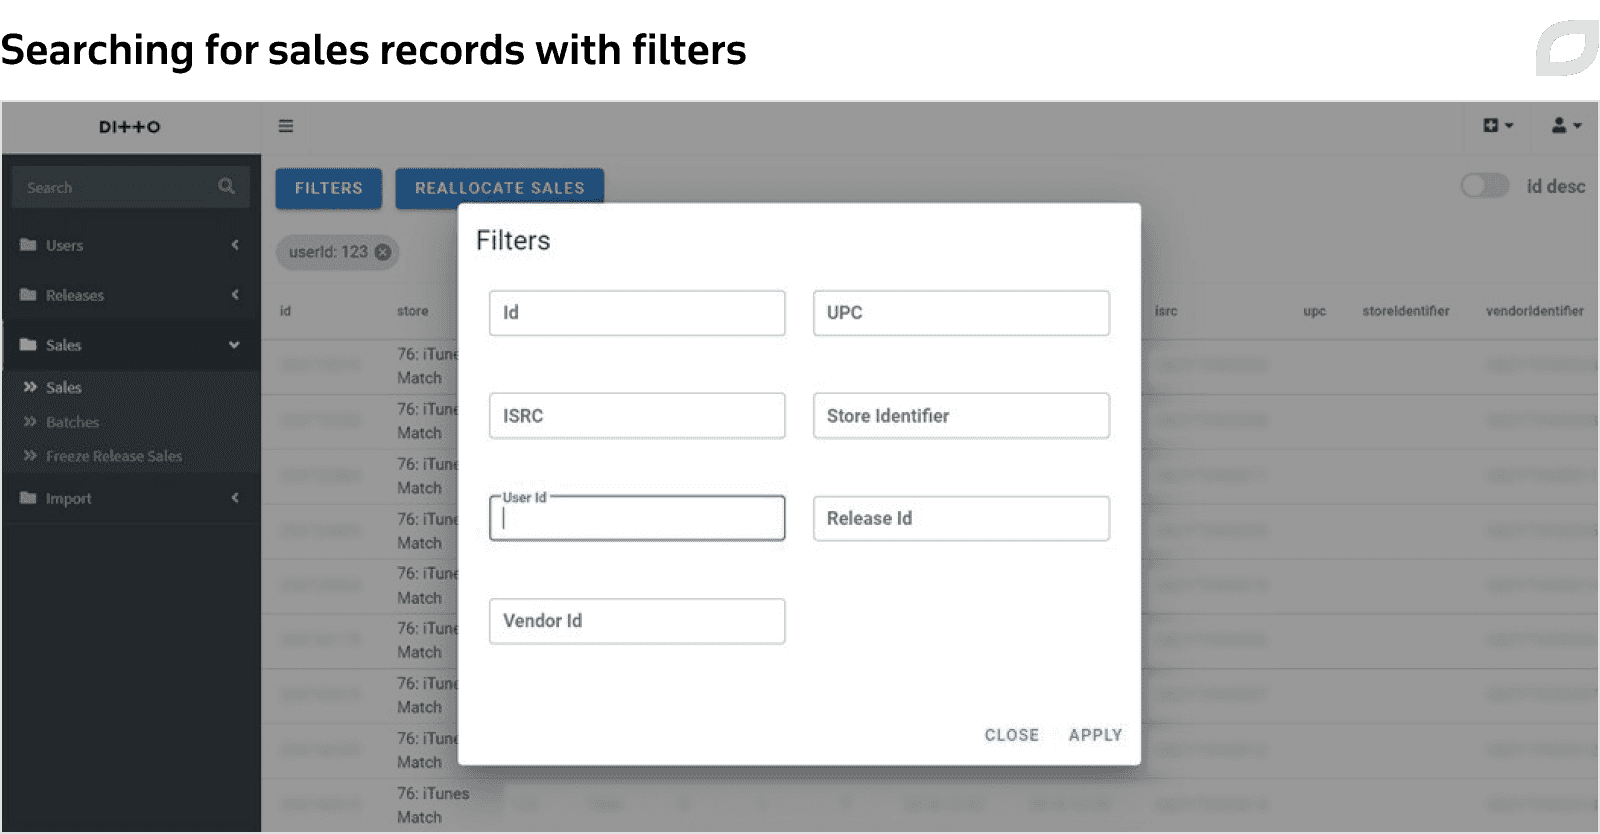 Searching for sales records with filters